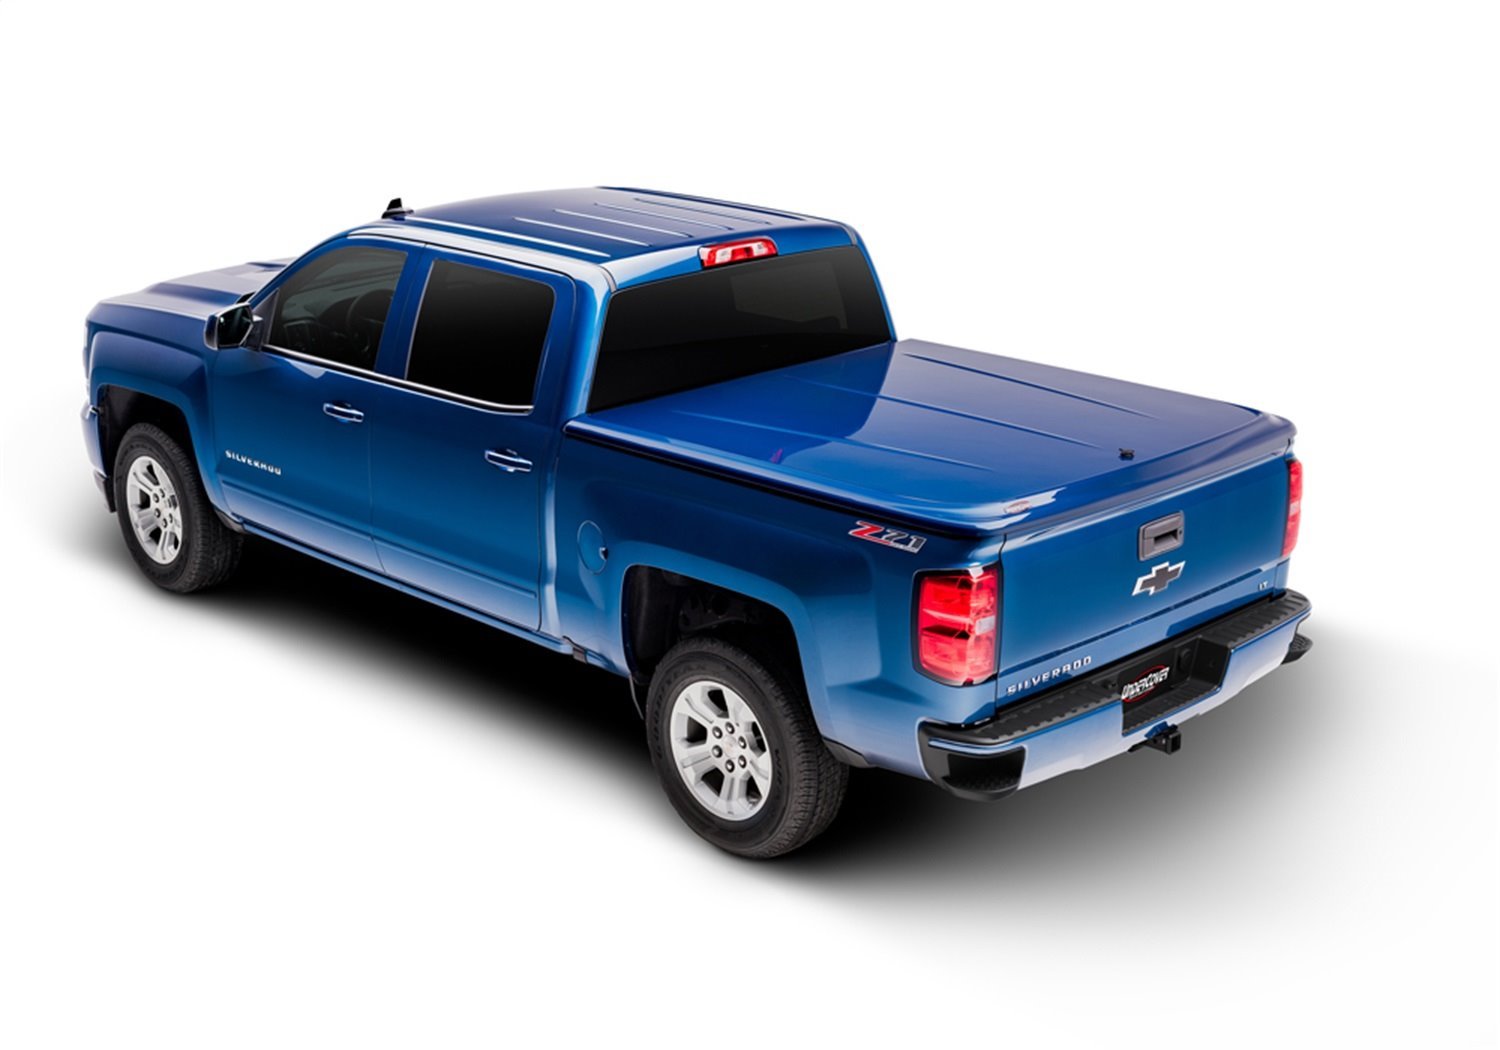 UC2146L-UG LUX Hard Non-Folding Cover, 2009-2014 Ford F-150 5'7" Bed EXT/Crew Cab, UG White Platinum